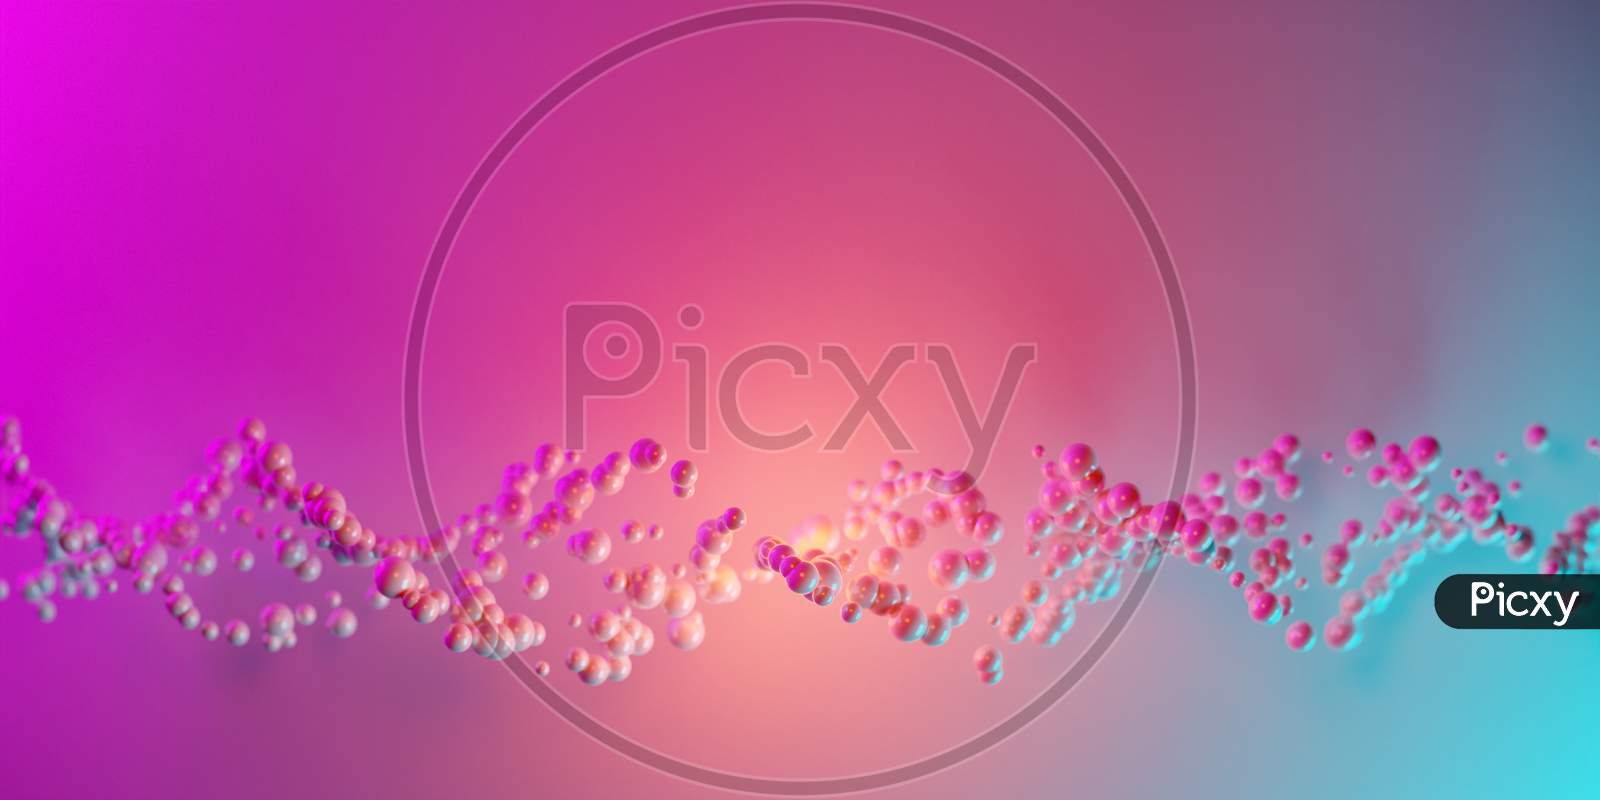 3D Illustration Of A Stereo Strip Of Different Colors. Geometric Stripes Similar To Waves. Simplified Pink And Blue  Dna Line On Gradient Isolated Background